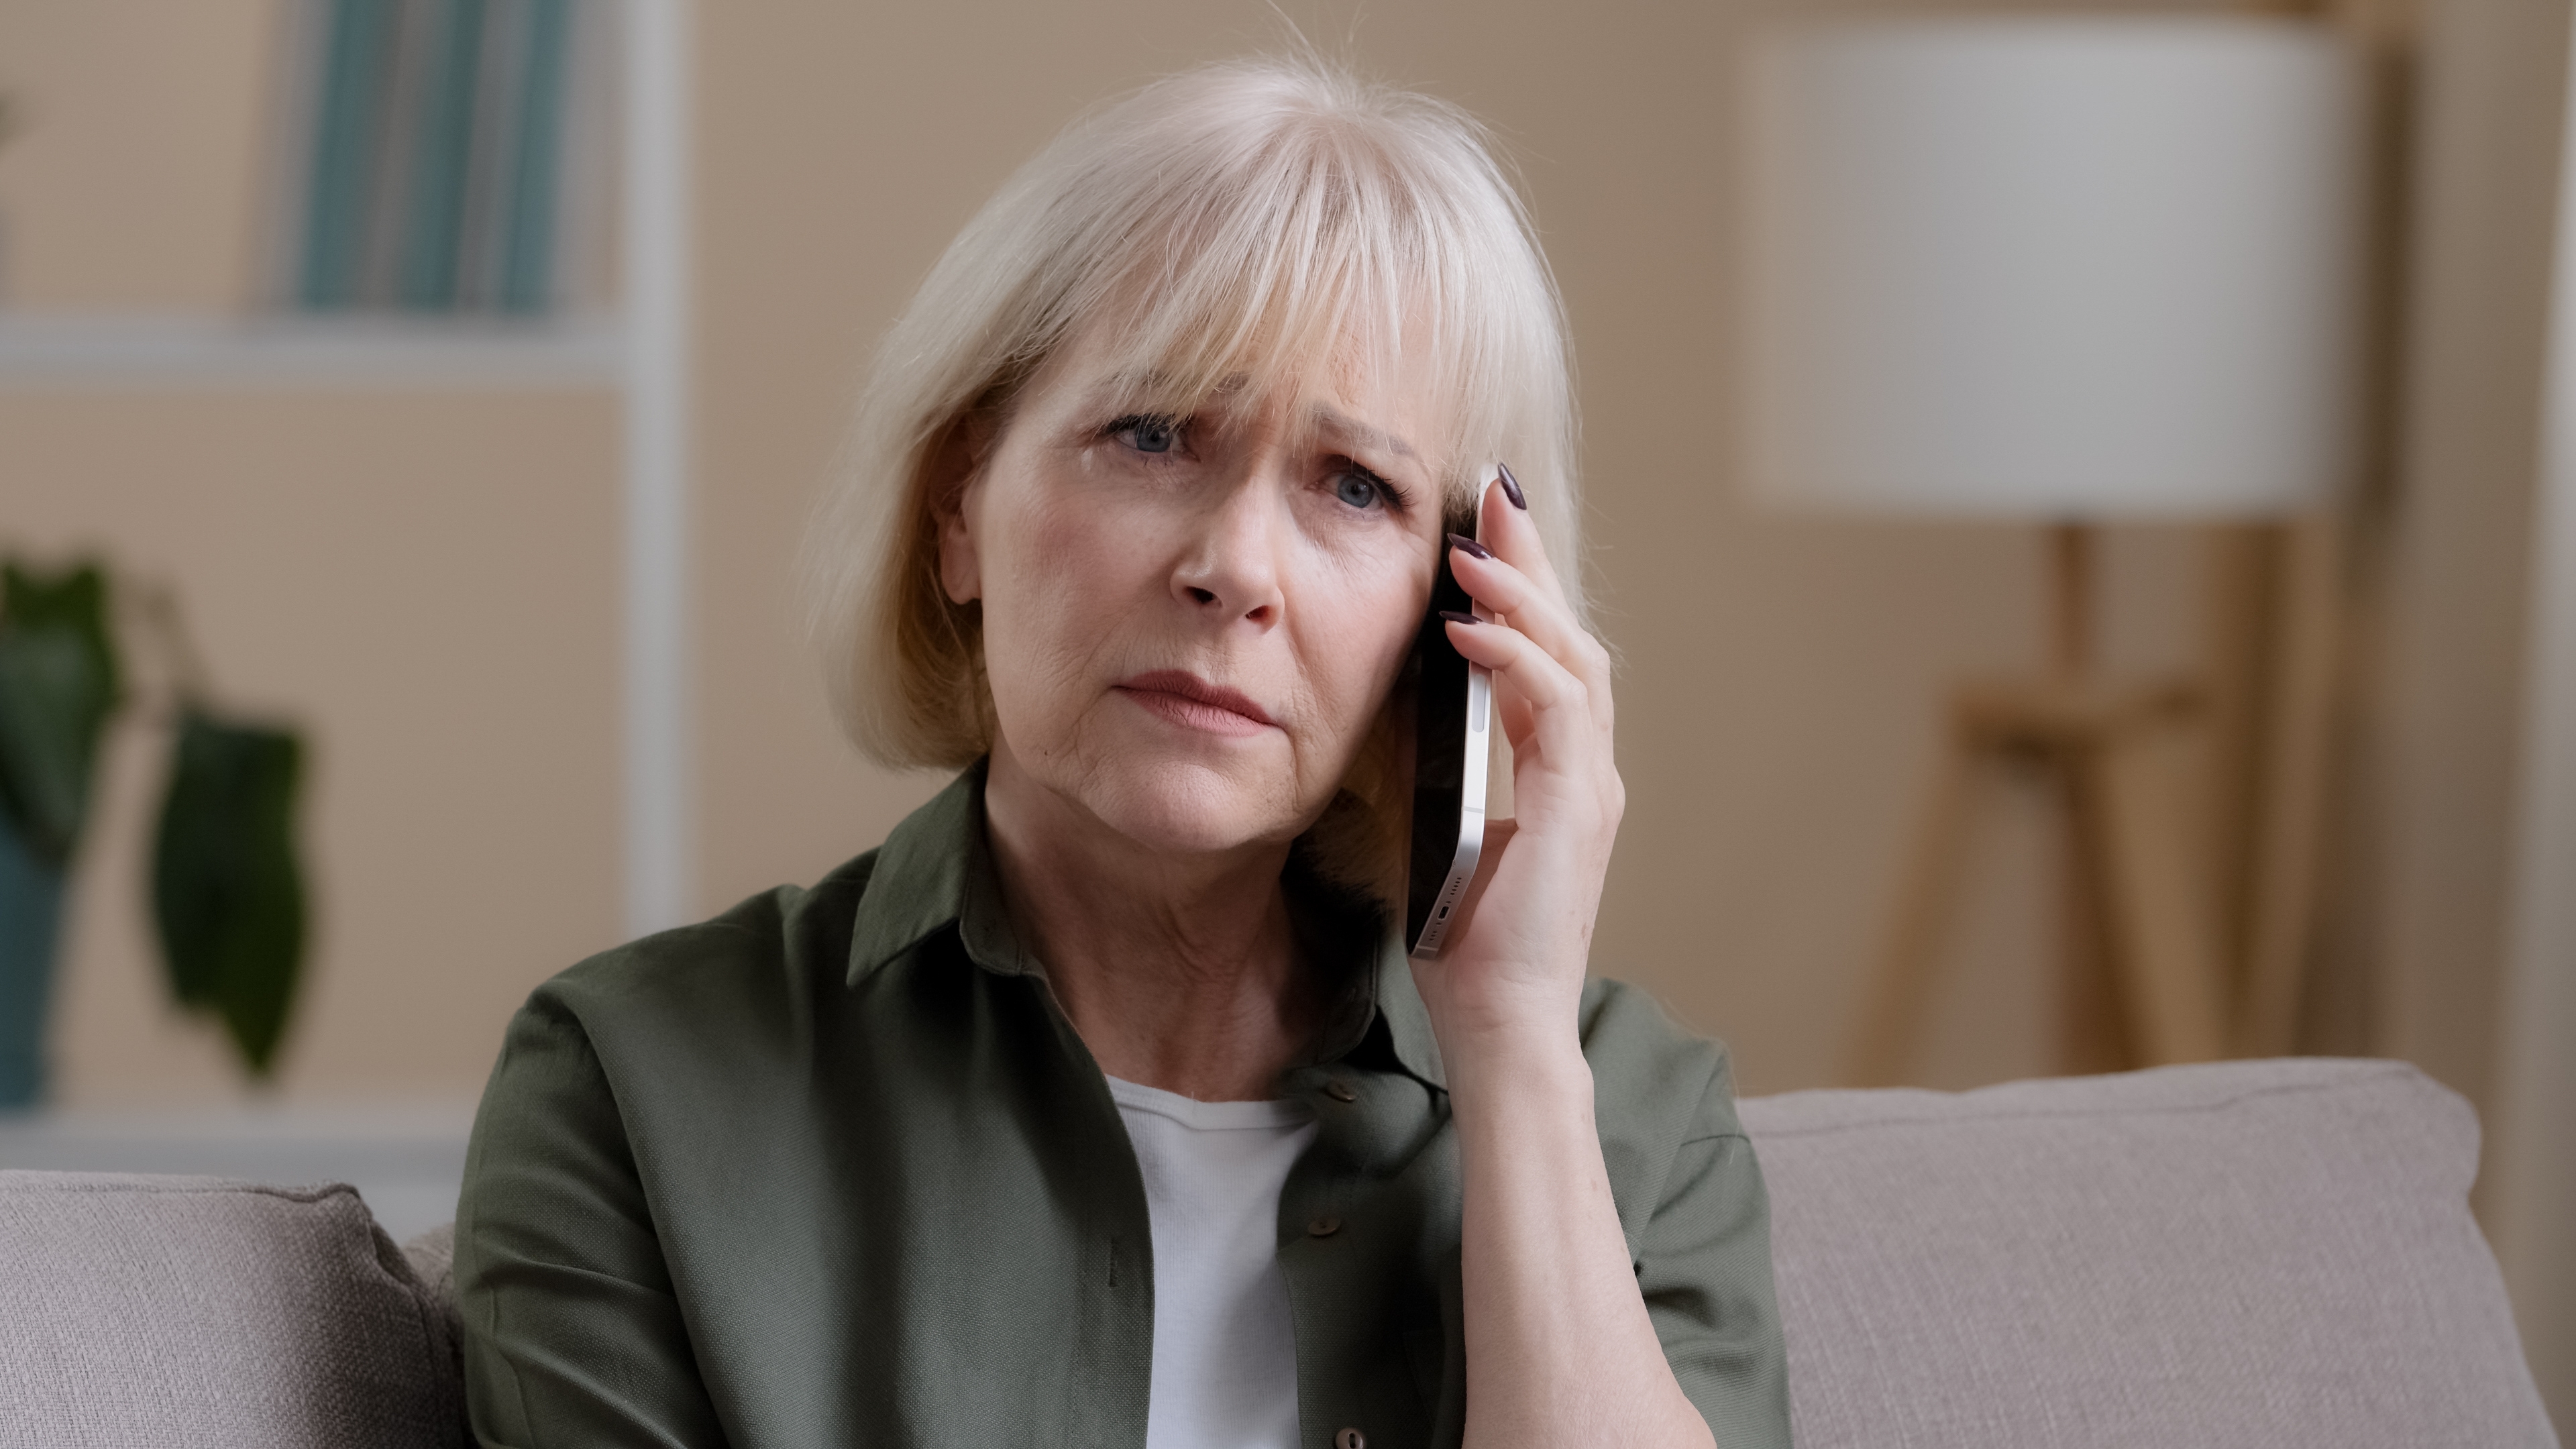 A distraught senior woman talking on her phone | Source: Shutterstock